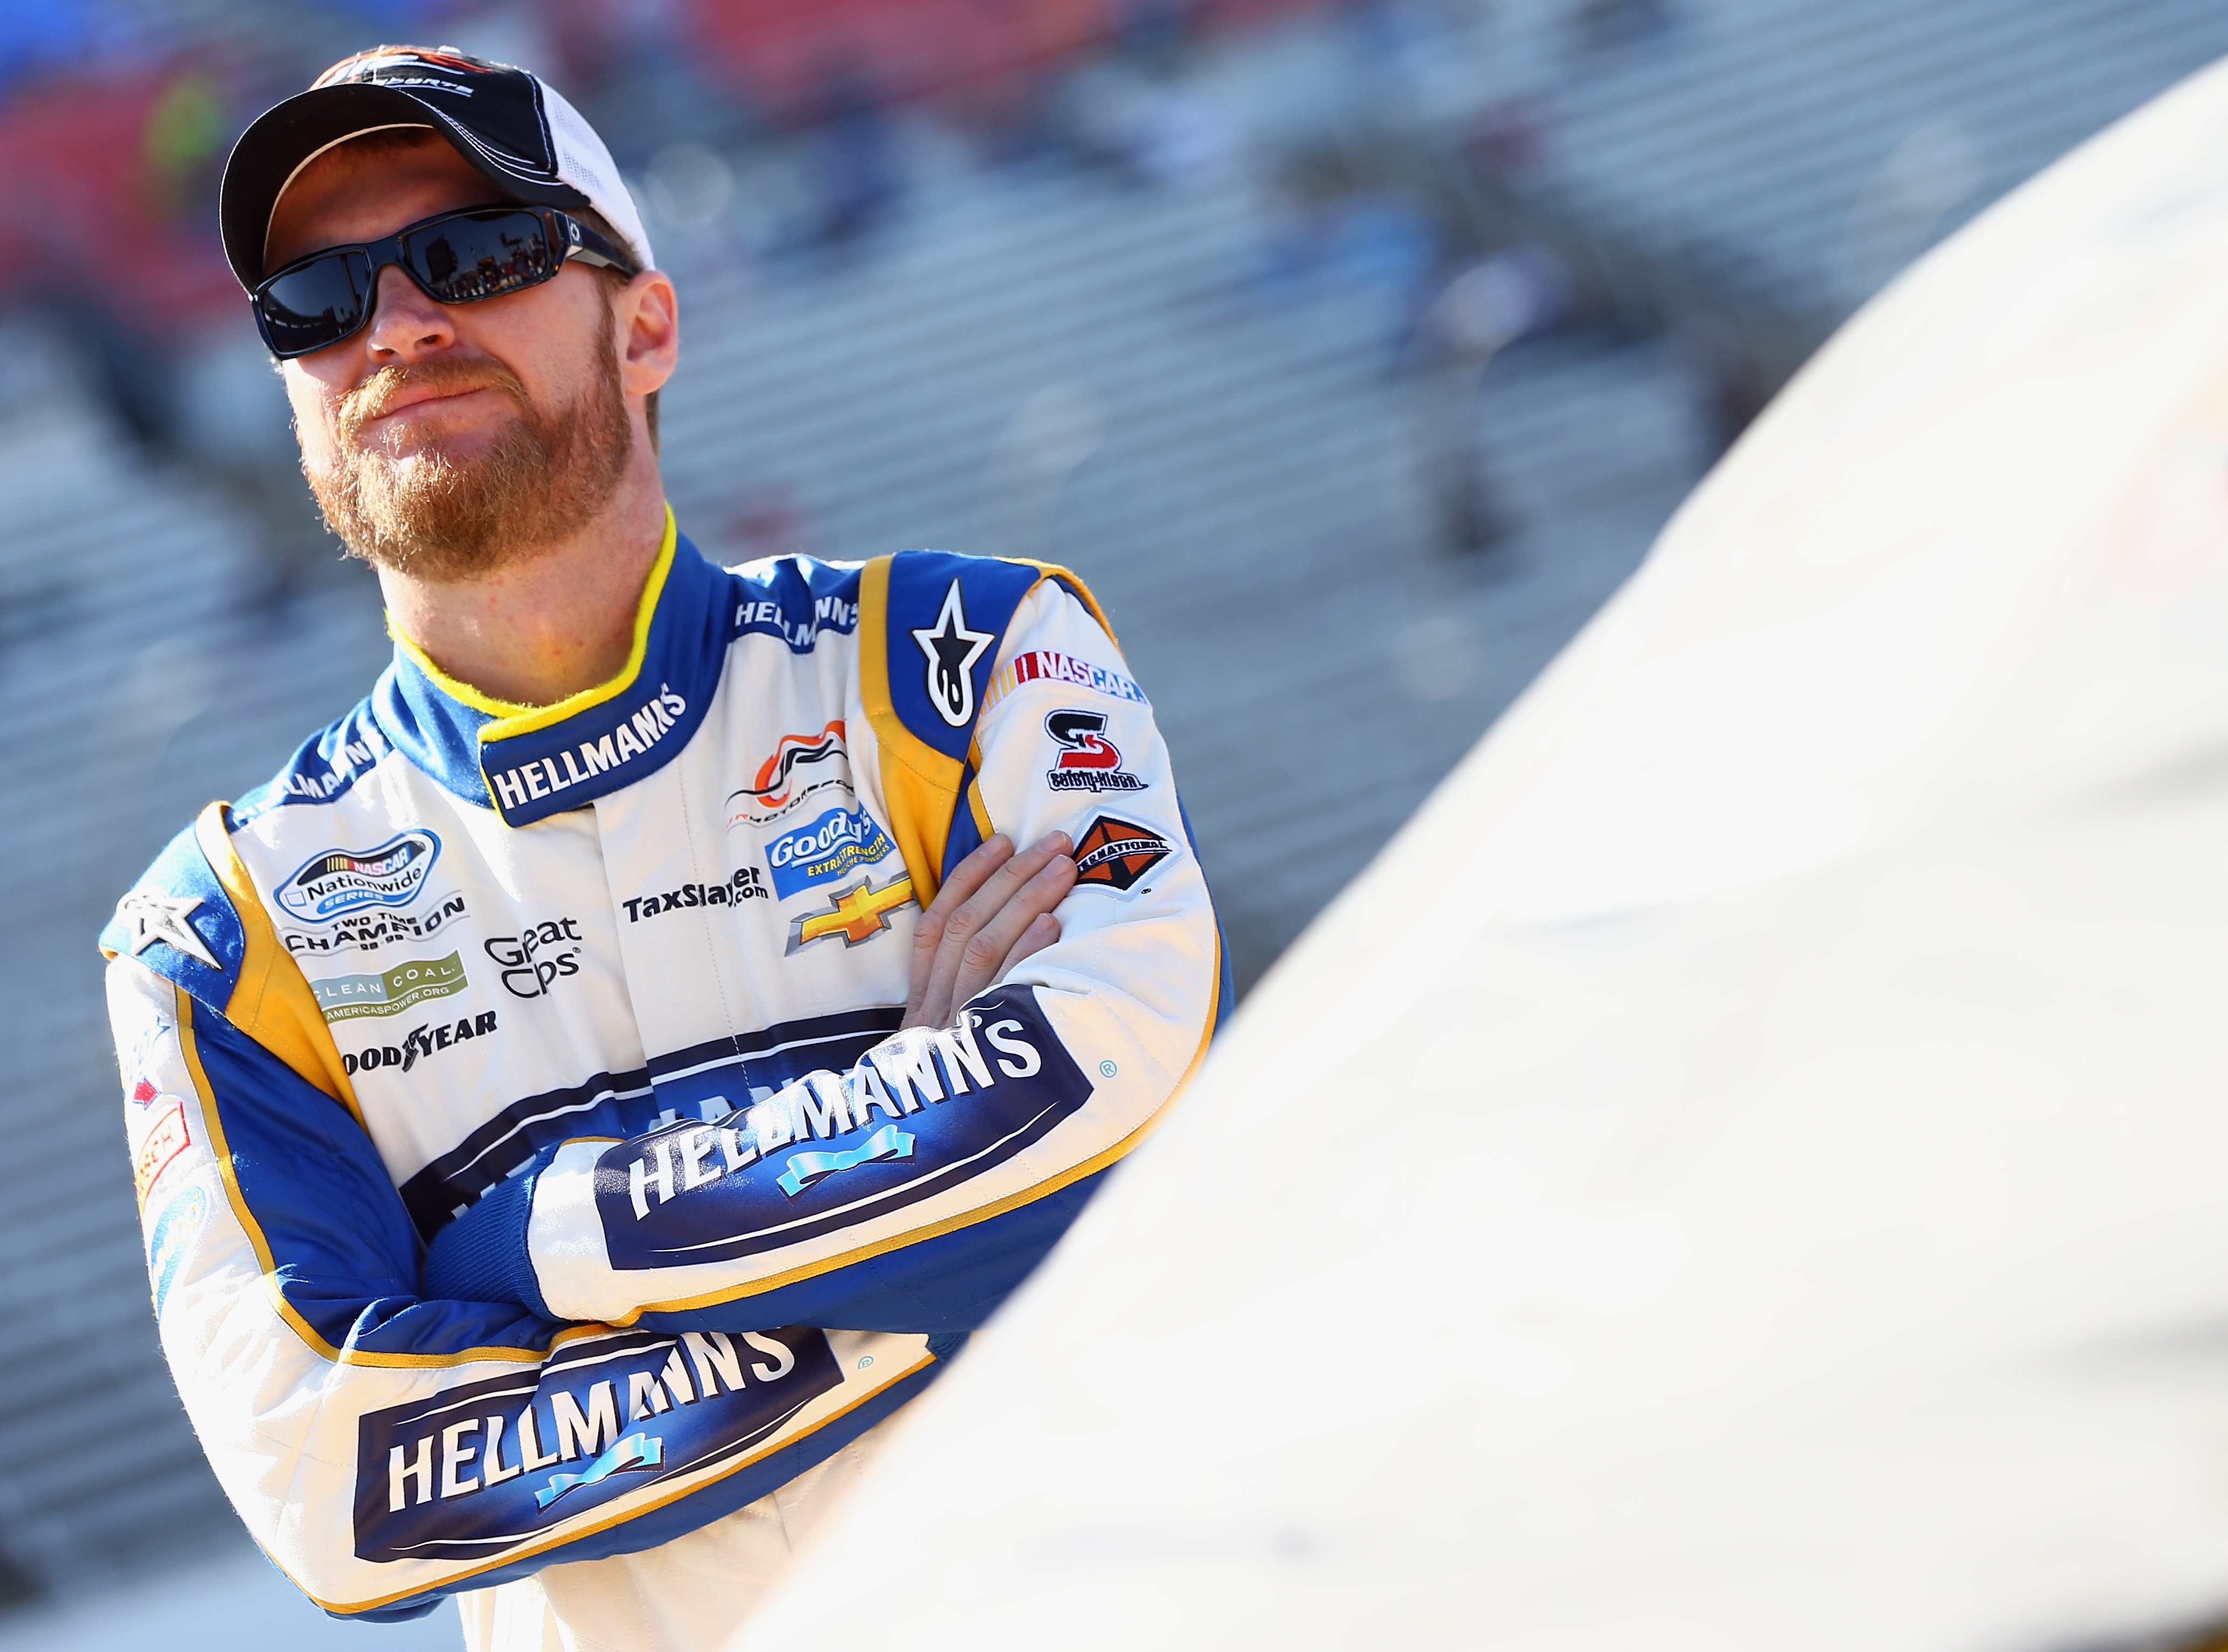 Dale Earnhardt Jr. is still frustrated by his father's absence during a big event.